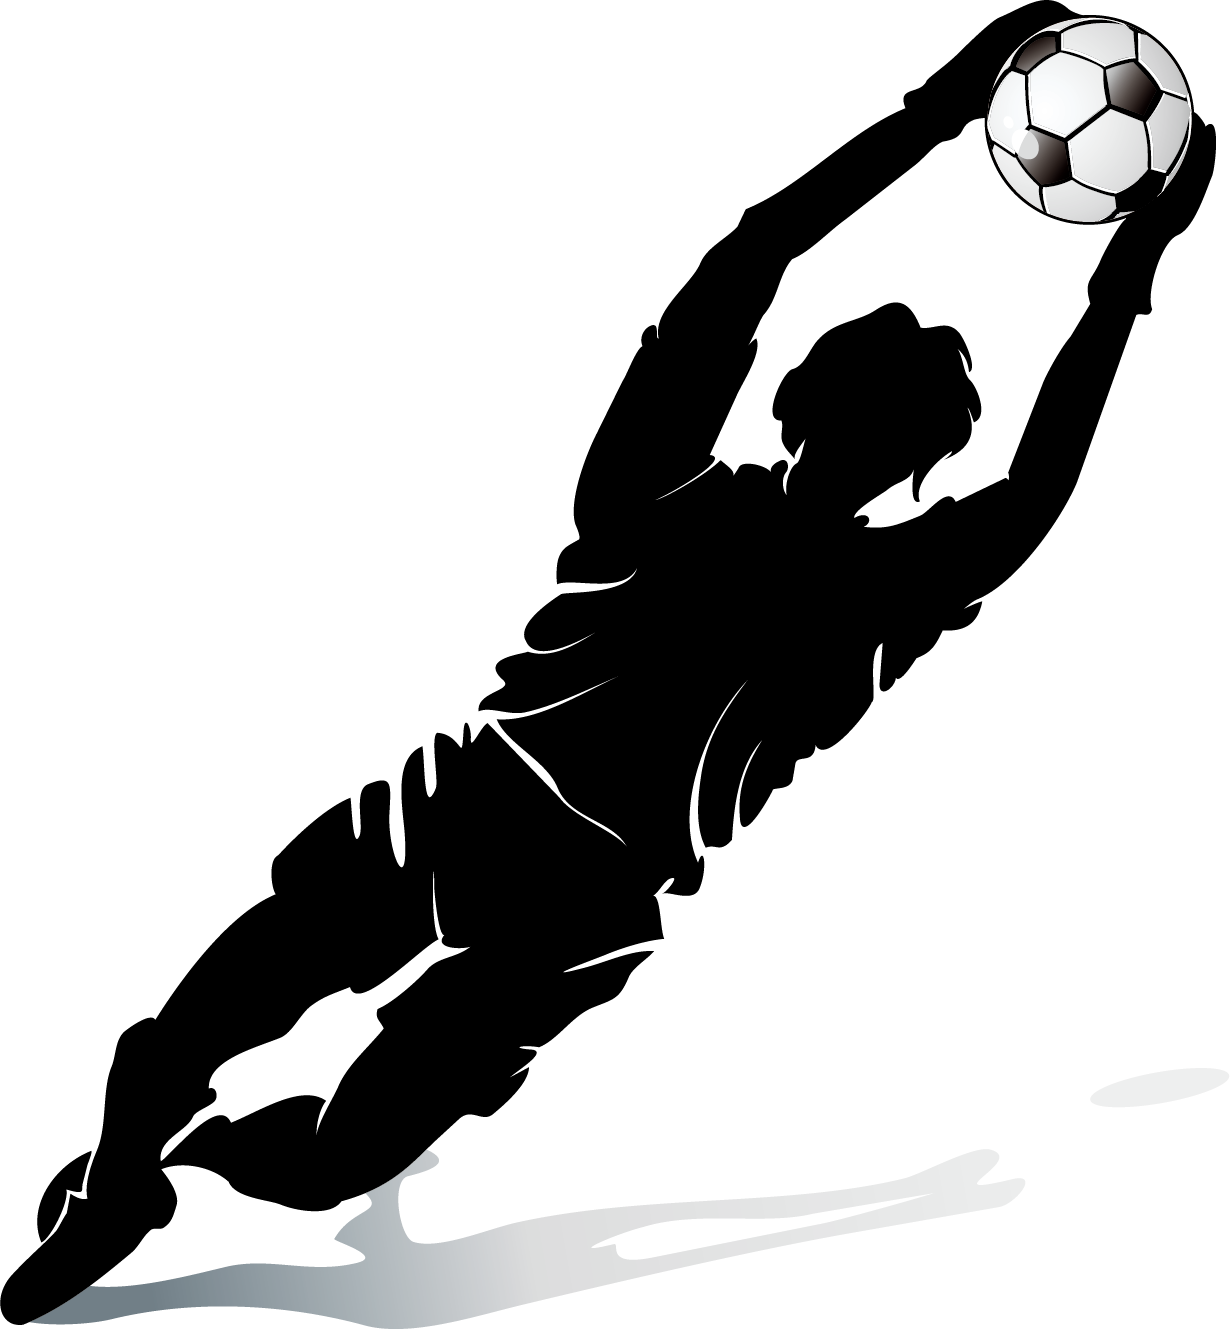 Player Football Silhouette Free Transparent Image HQ Clipart